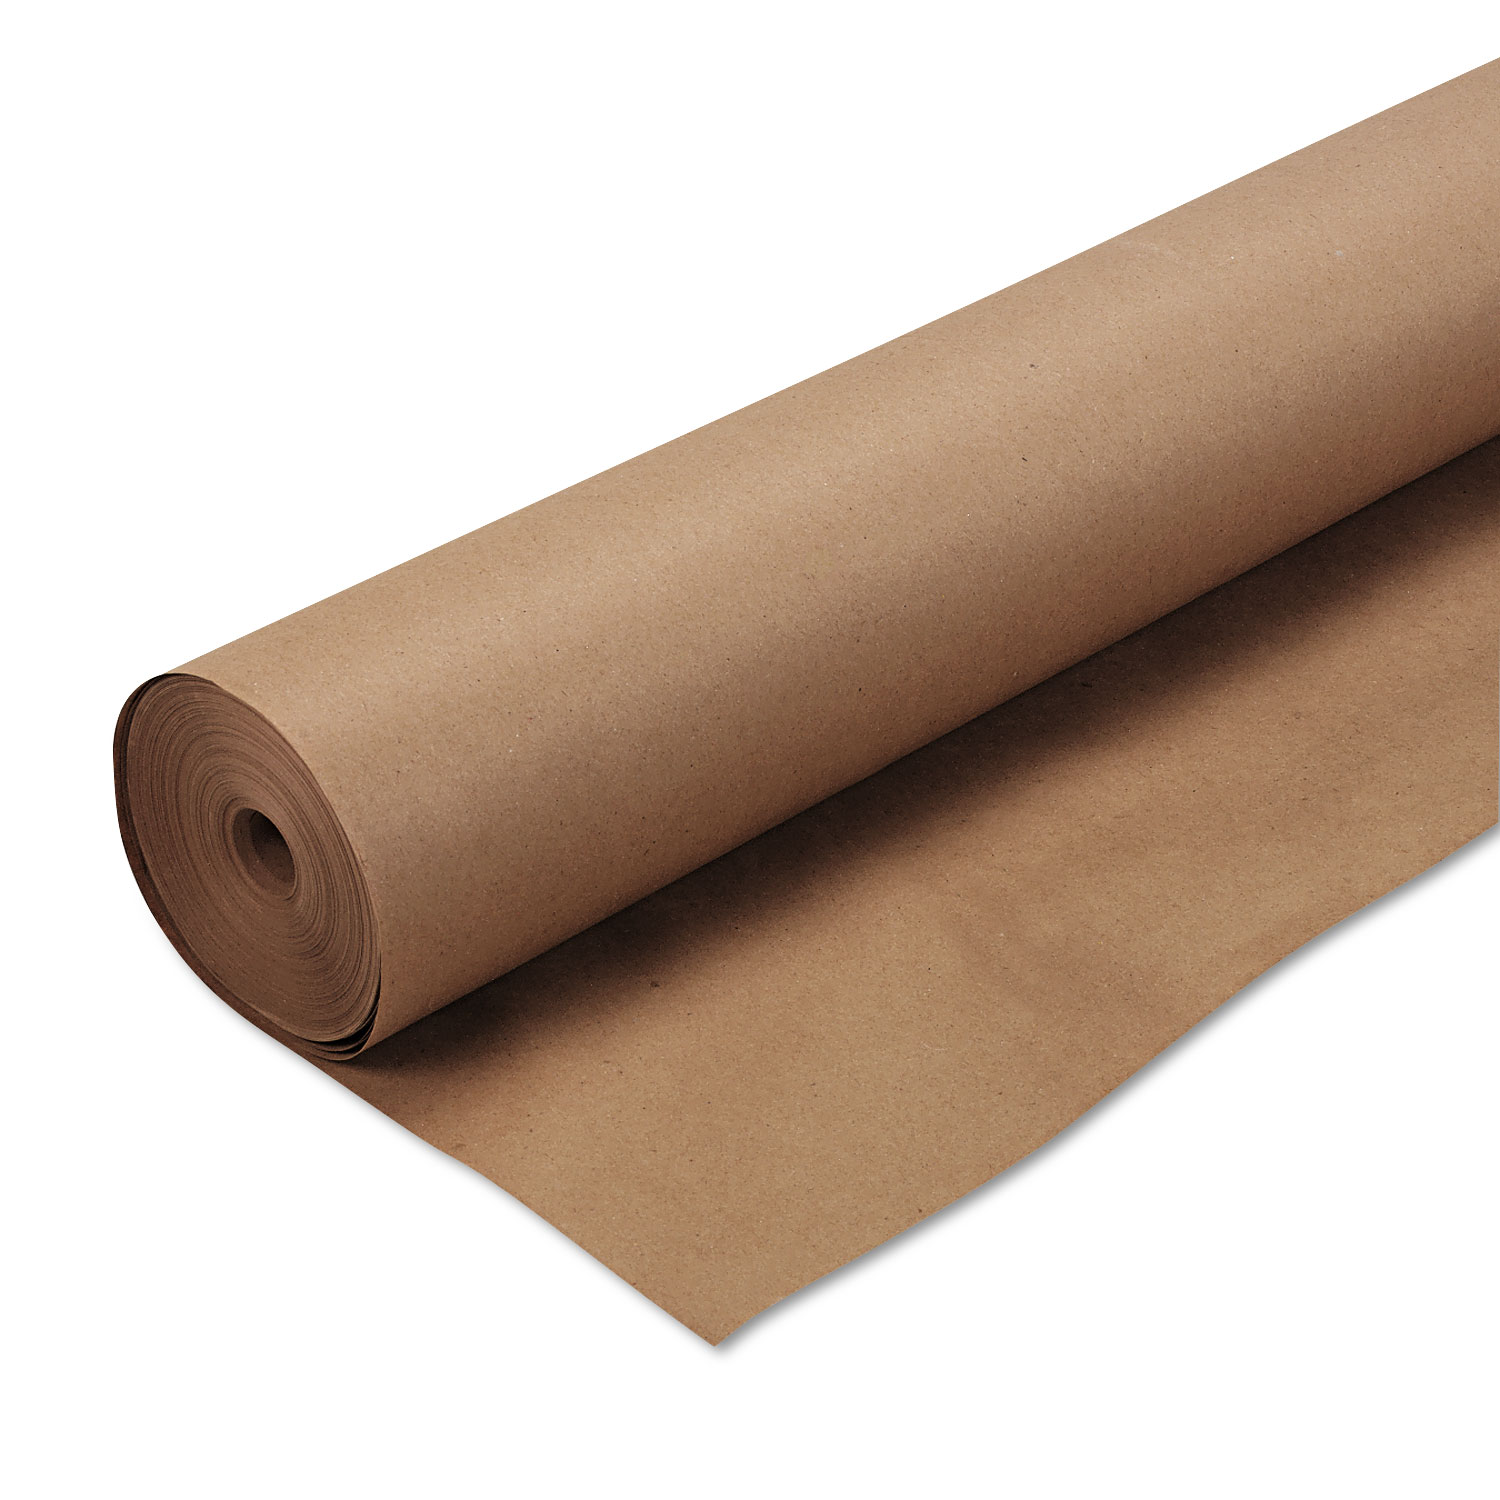  Pacon 5850 Kraft Wrapping Paper, 16lb, 48 x 200ft, Natural (PAC5850) 